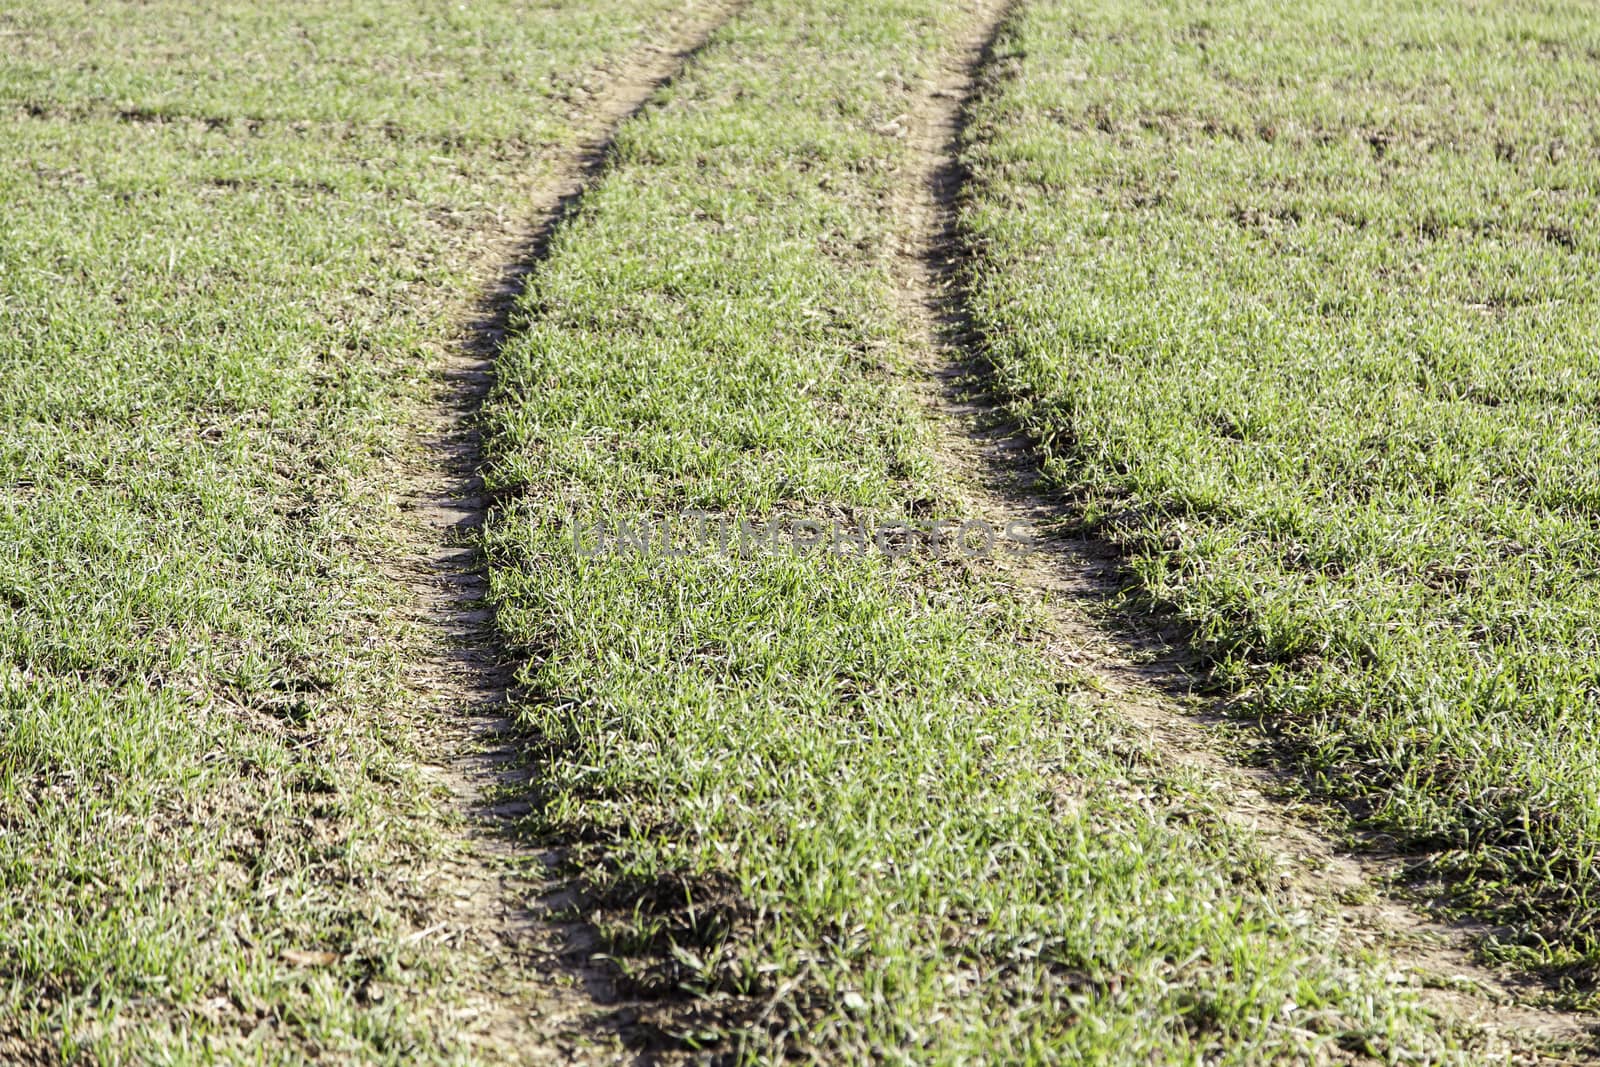 Tire marks in the grass, detail of footprints in the field